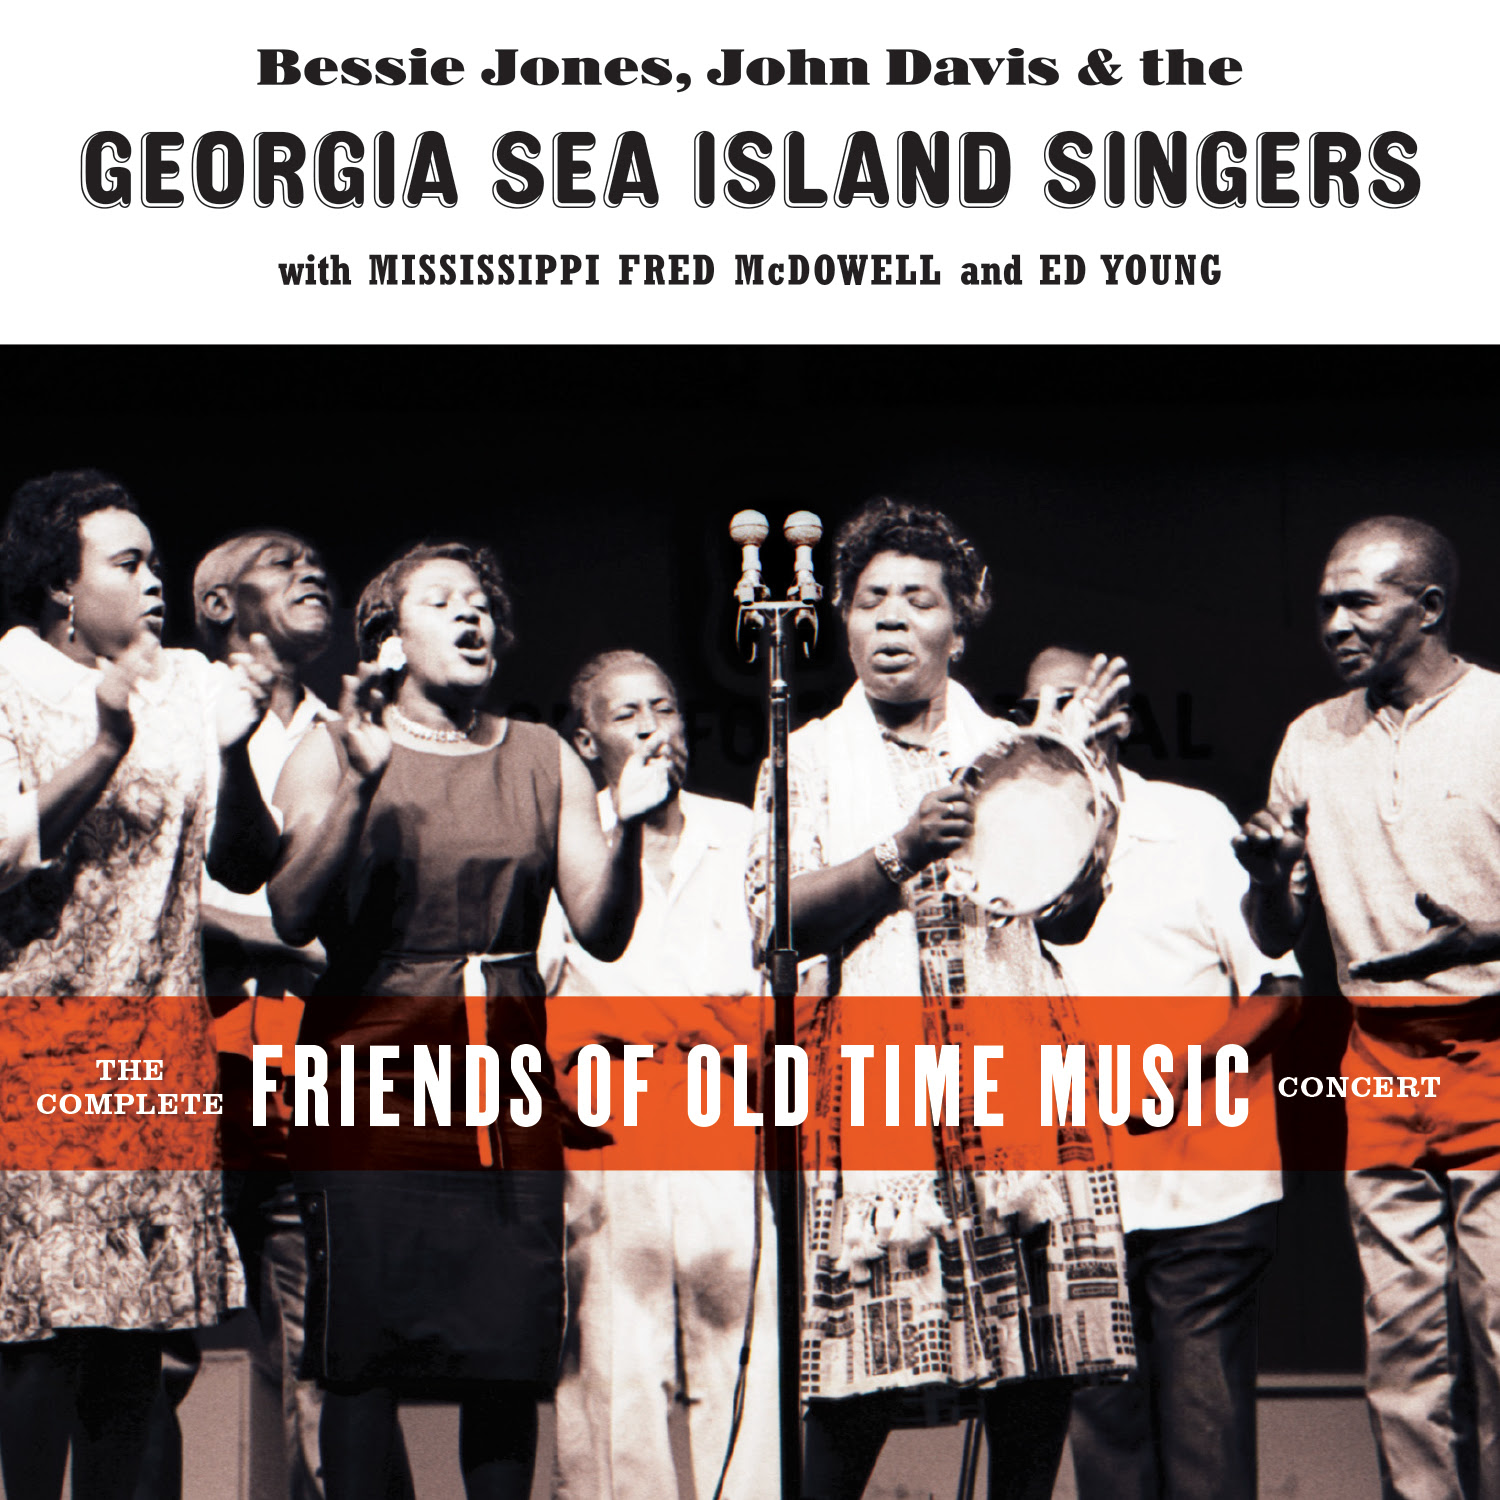 Smithsonian Folkways announces historical album feat Georgia Sea Island Singers and Mississippi Fred McDowell in the Civil Rights Era